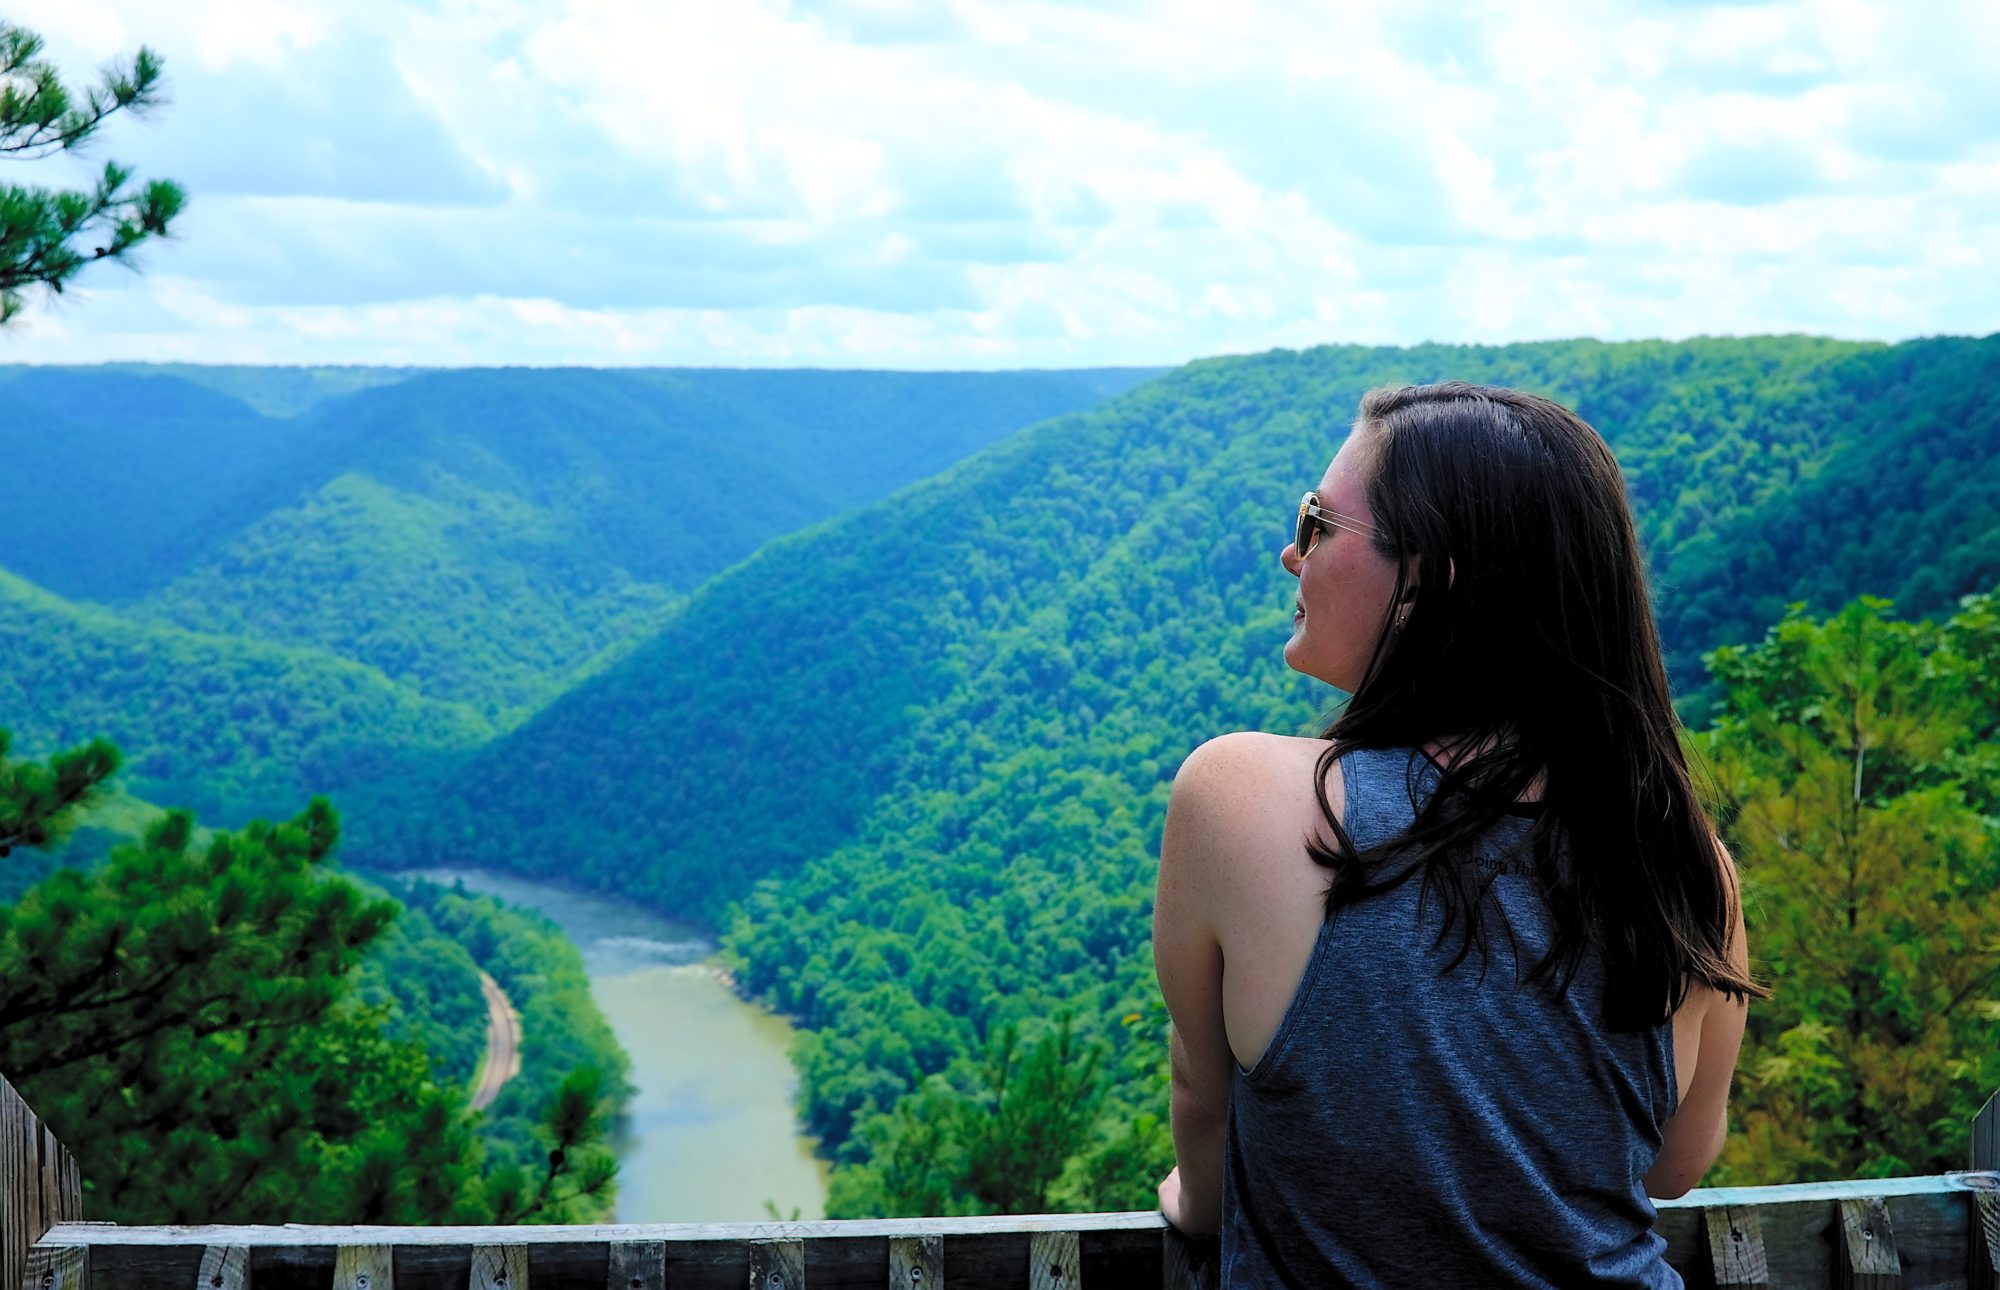 Alyssa looks out over the Turkey Spur Overlook in West Virginia